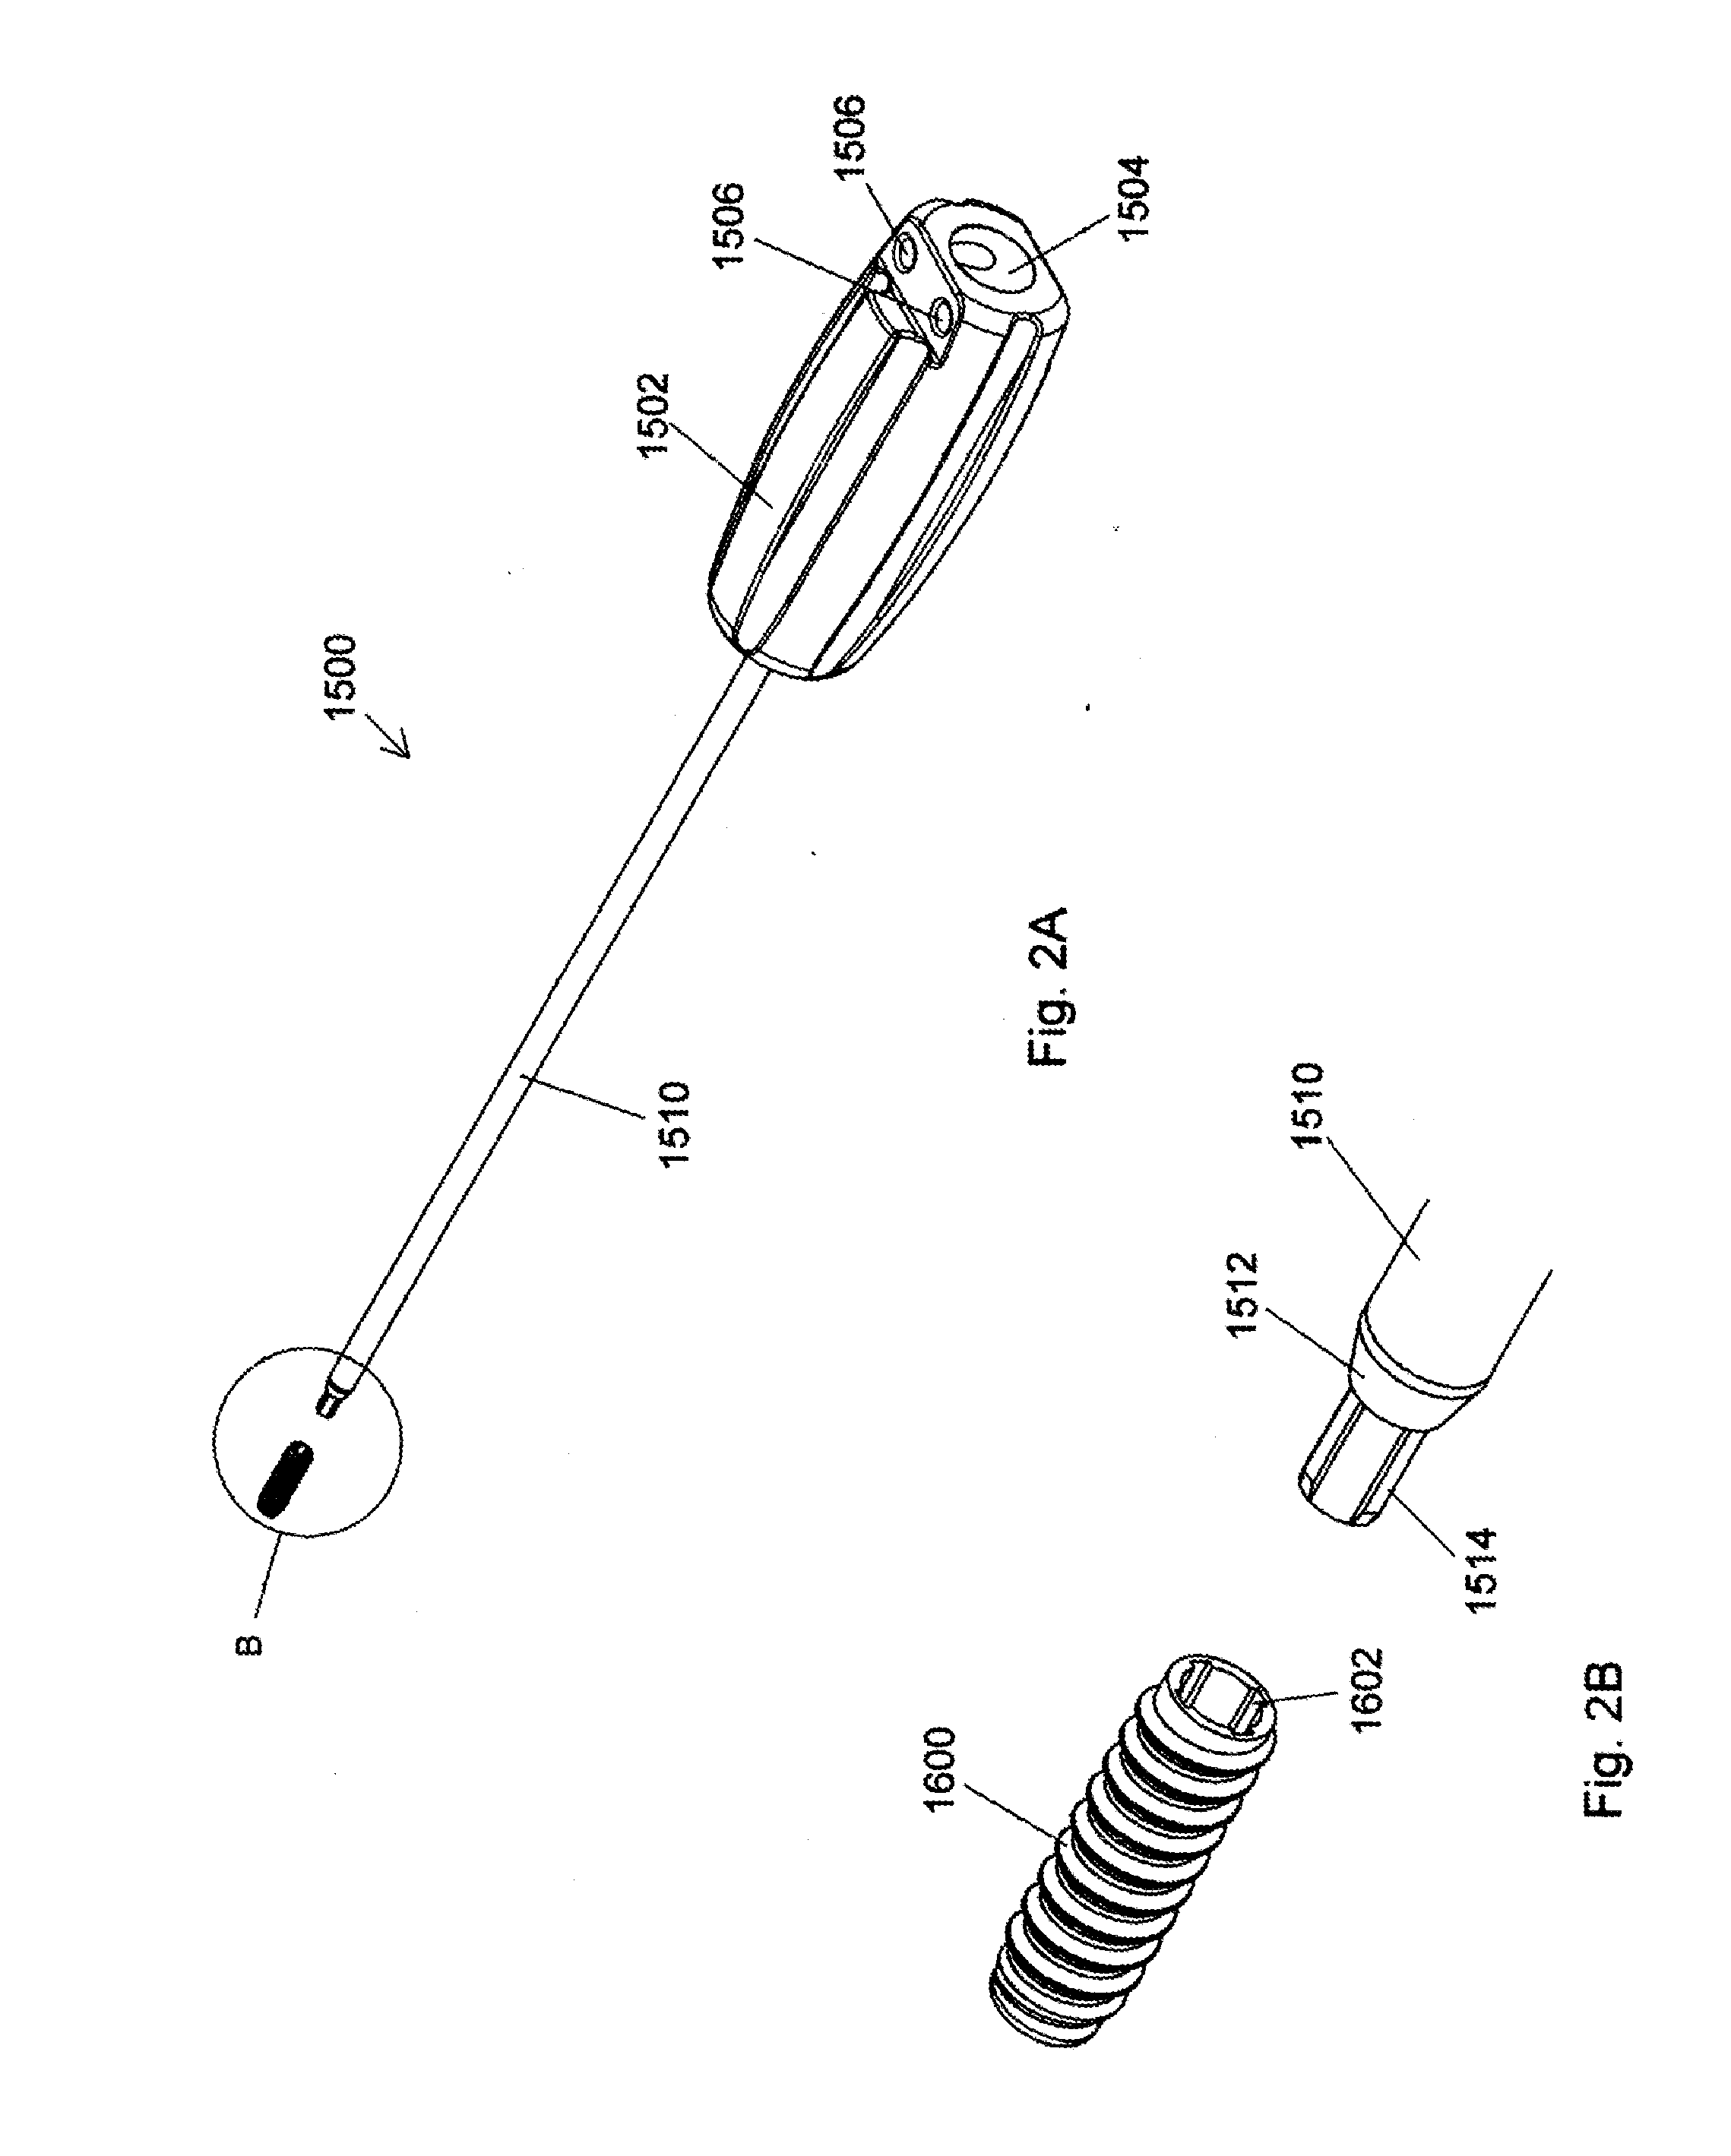 Implant placement systems, devices, and methods